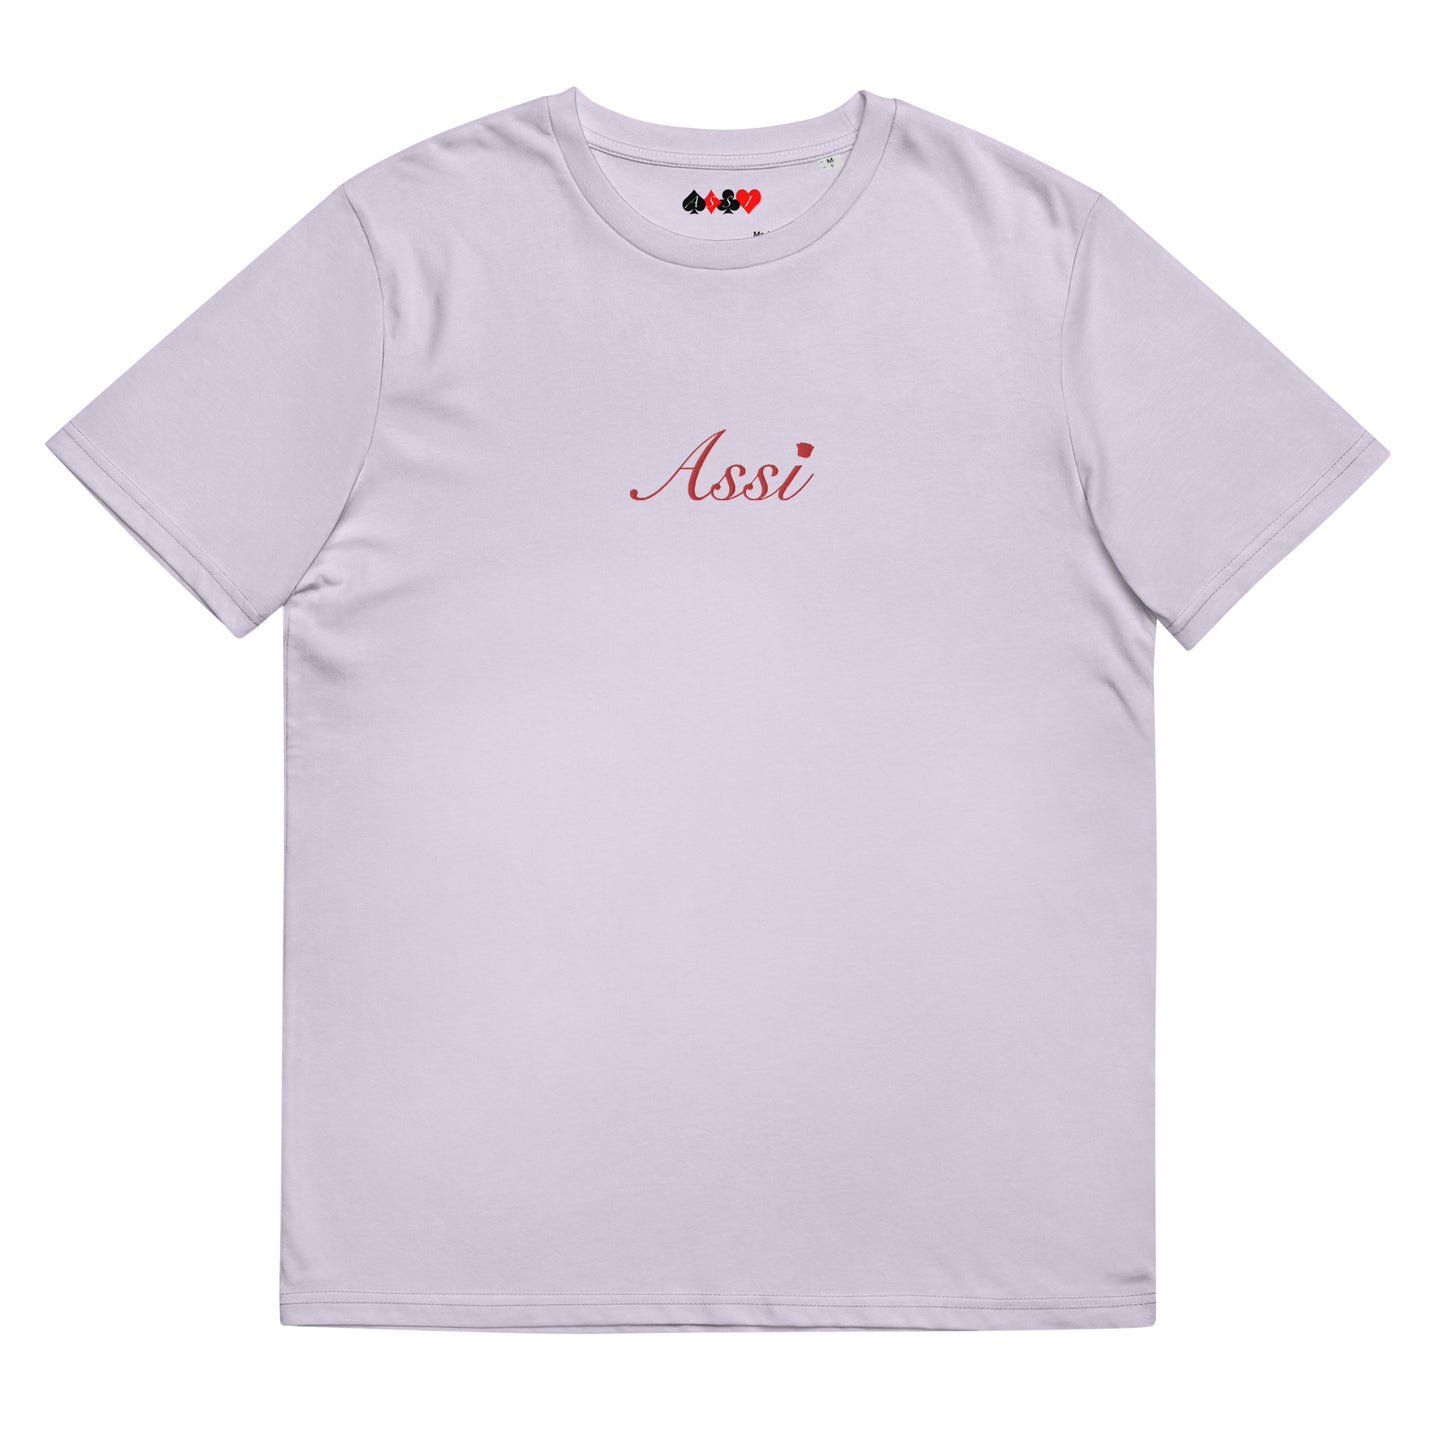 Assi embroidered & red flower unisex t-shirt